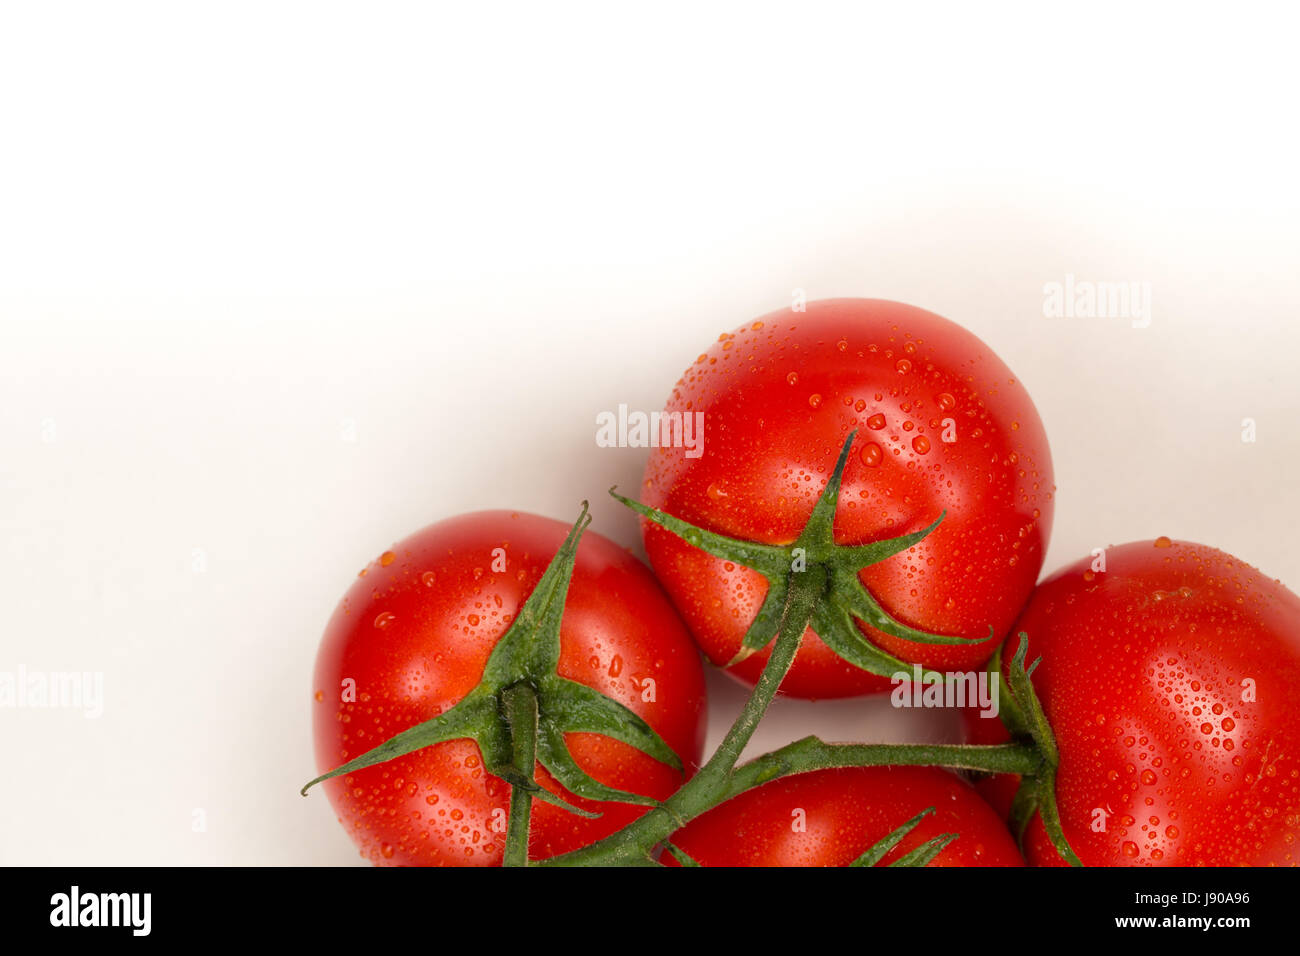 Red fresh tomatoes isolated on white background Stock Photo